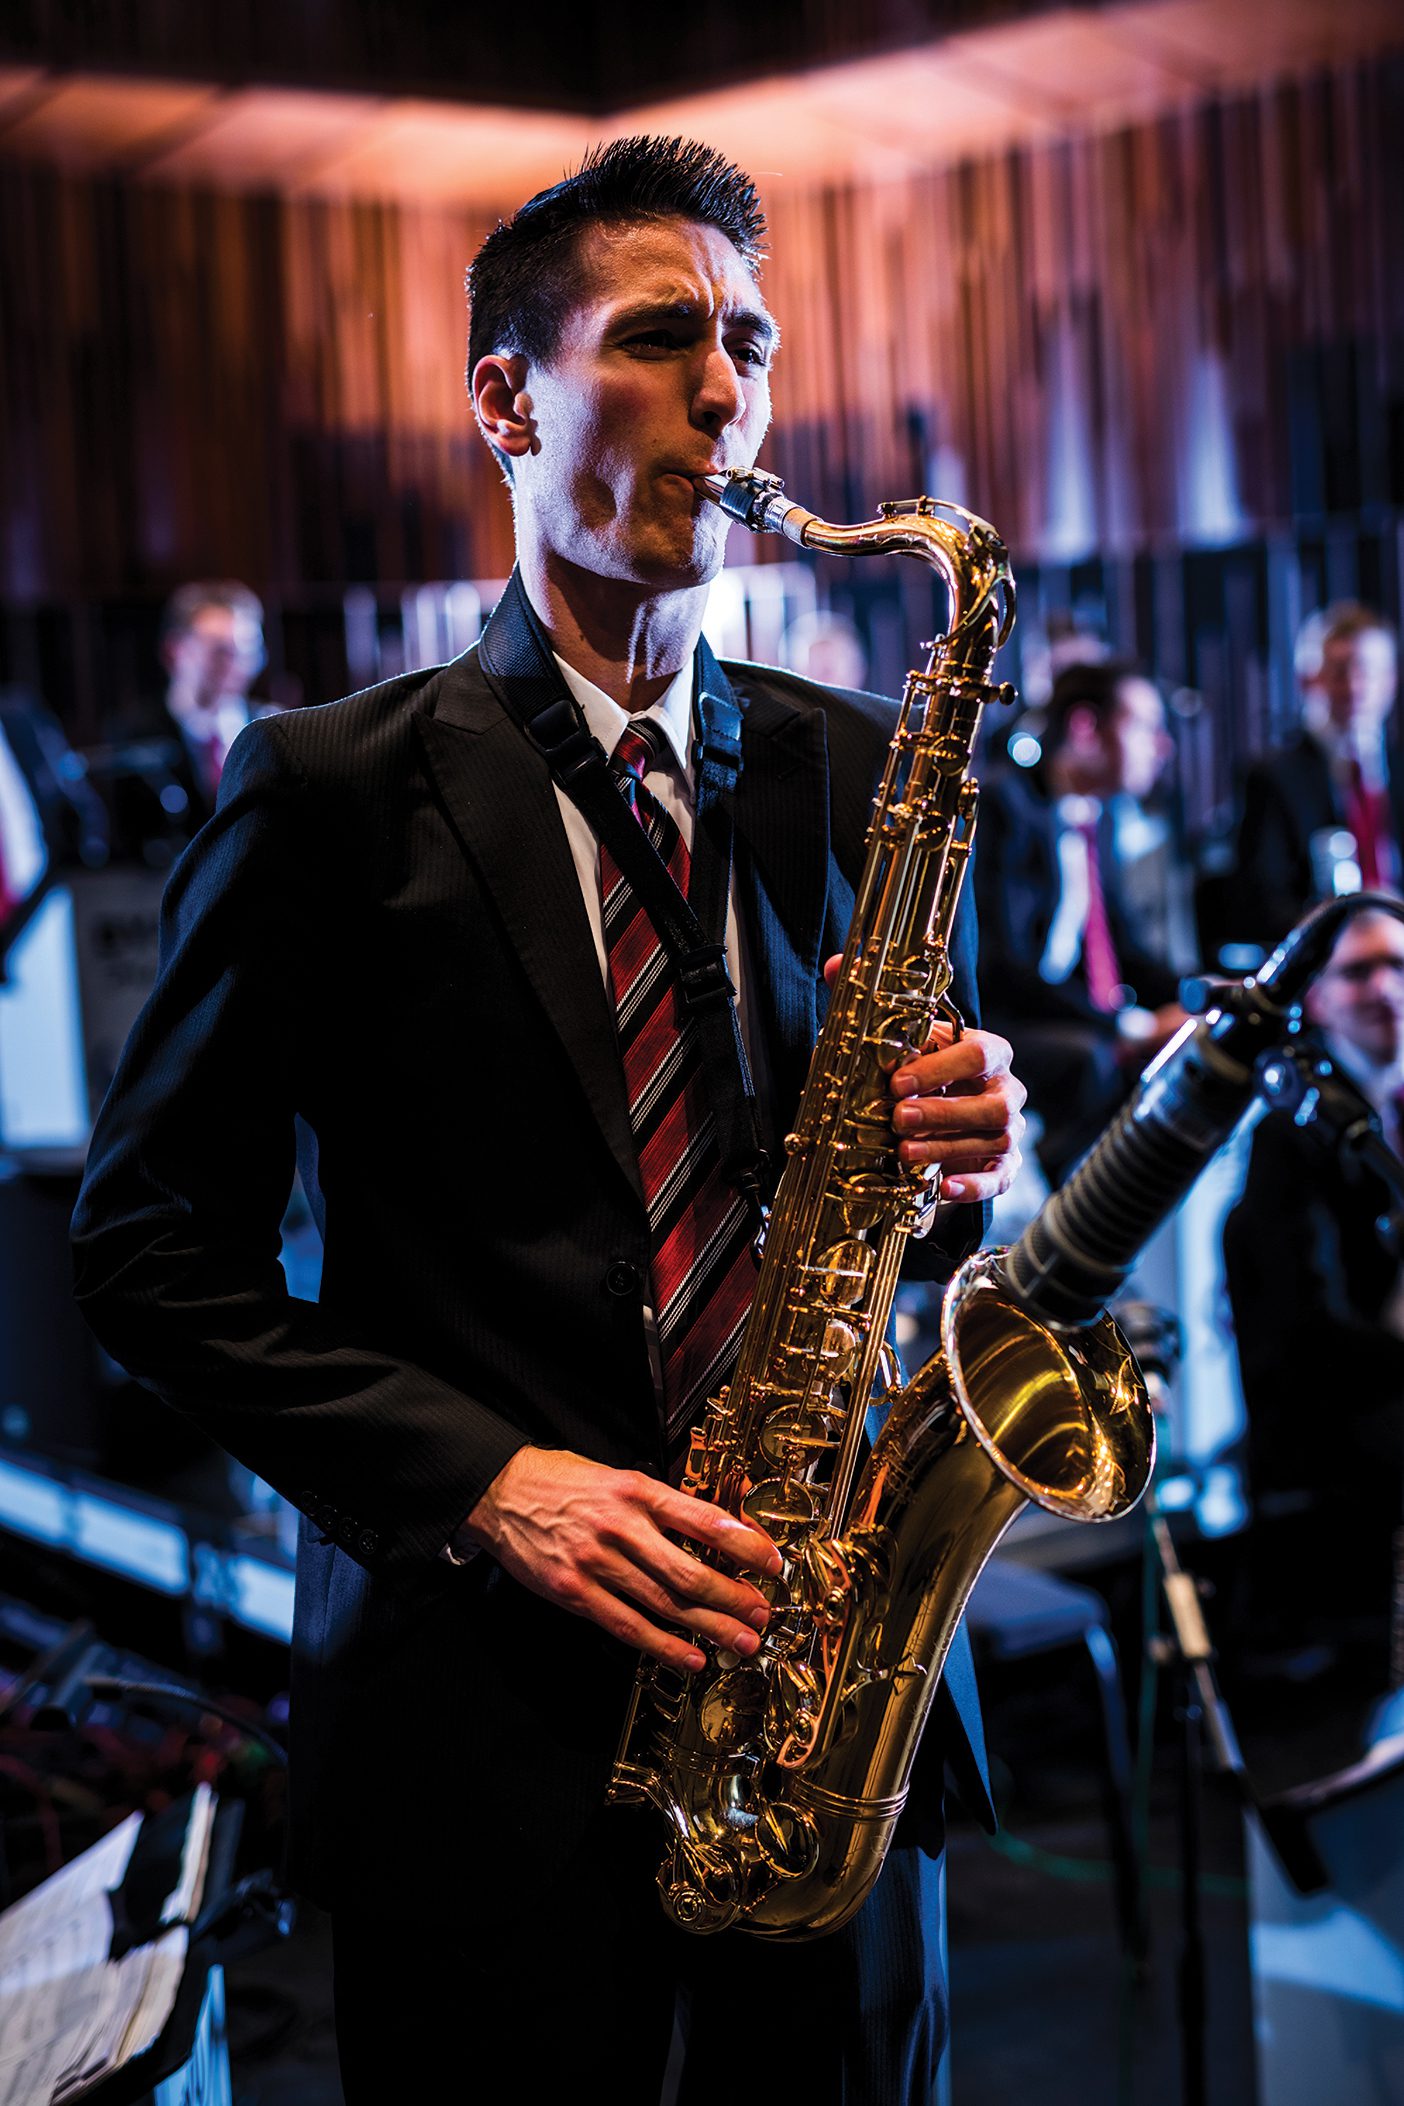 A man in a black suit with spiky hair is playing a saxophone. He's in a dimly-lit room and there are other musicians behind him dressed in black suits too.